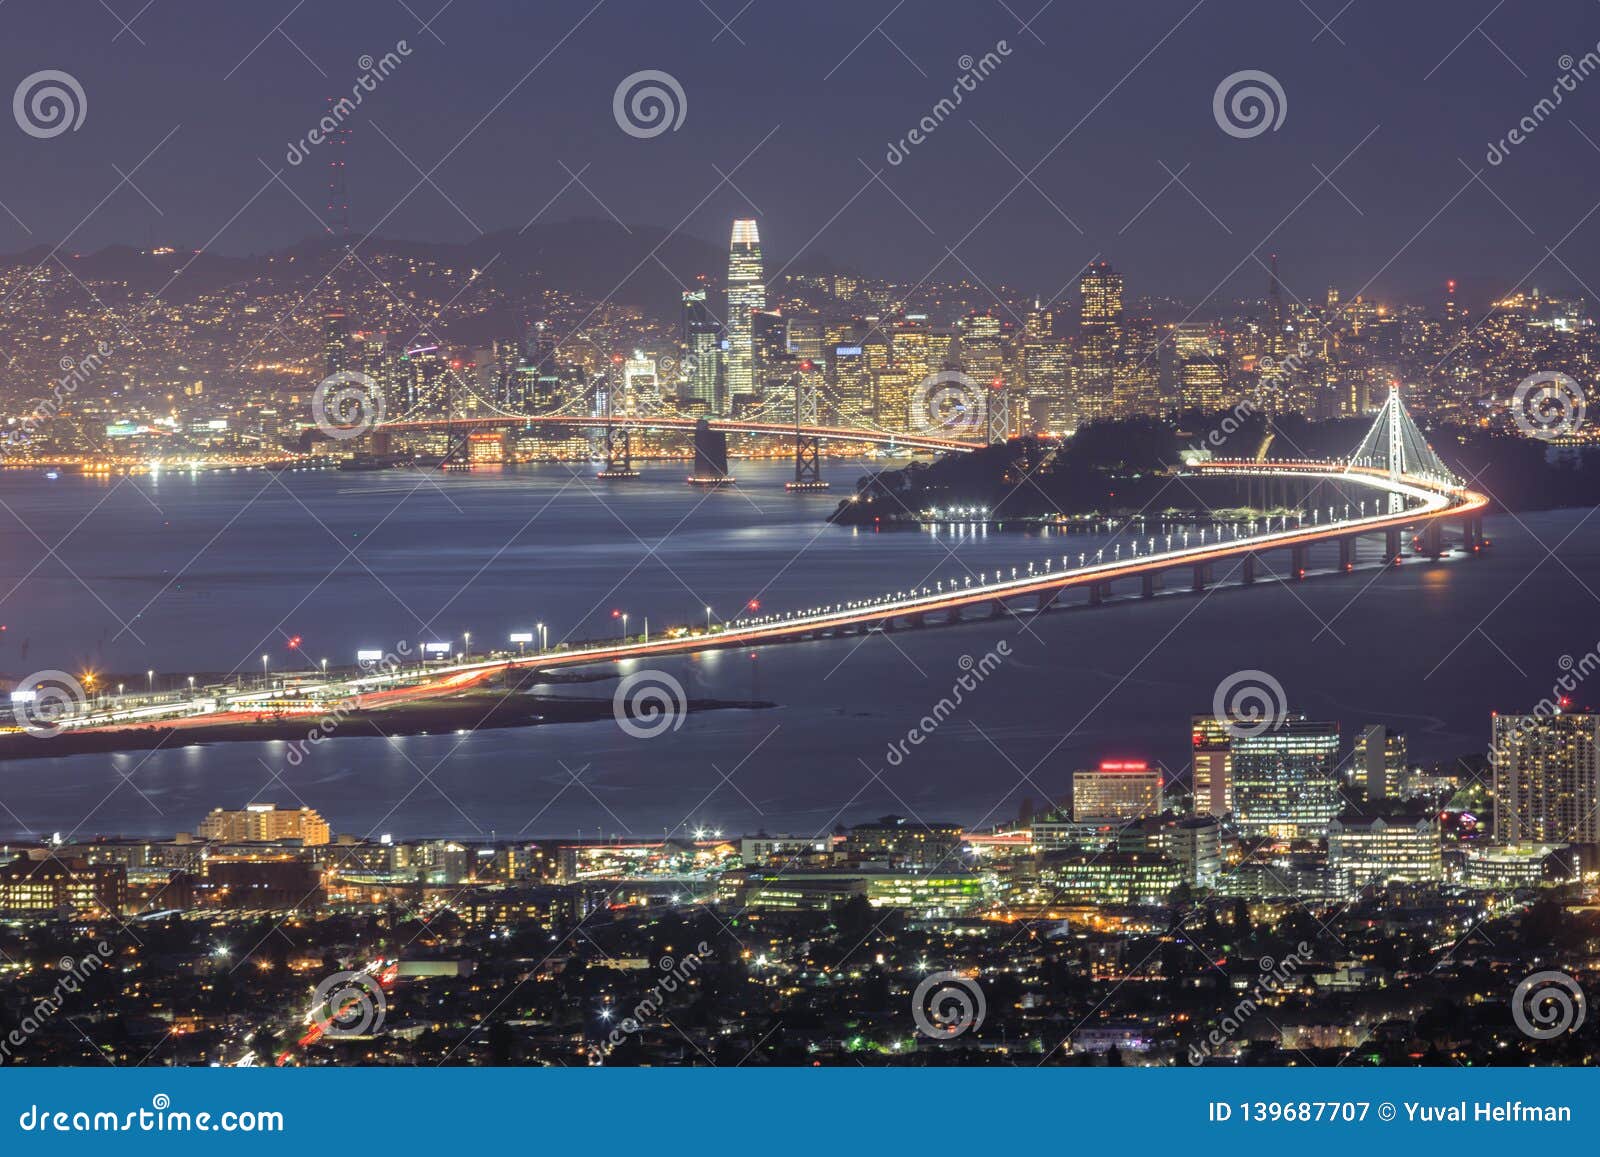 winter evening views of berkeley and san francisco waterfronts.